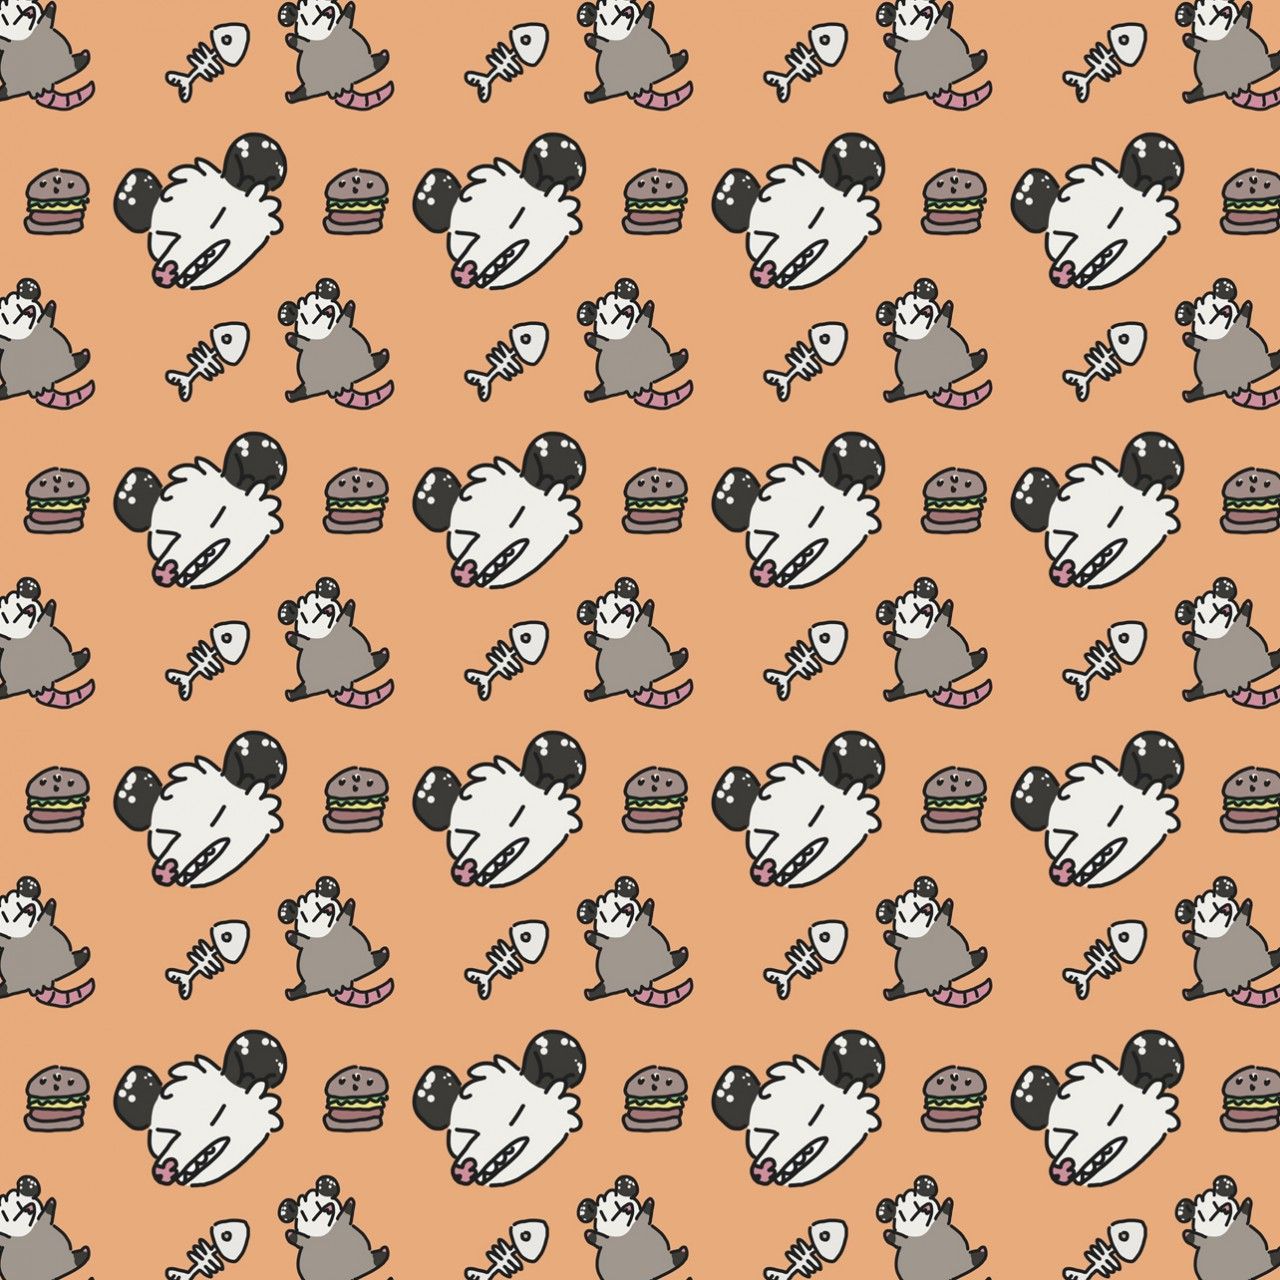 Opossum Wallpaper.GiftWatches.CO